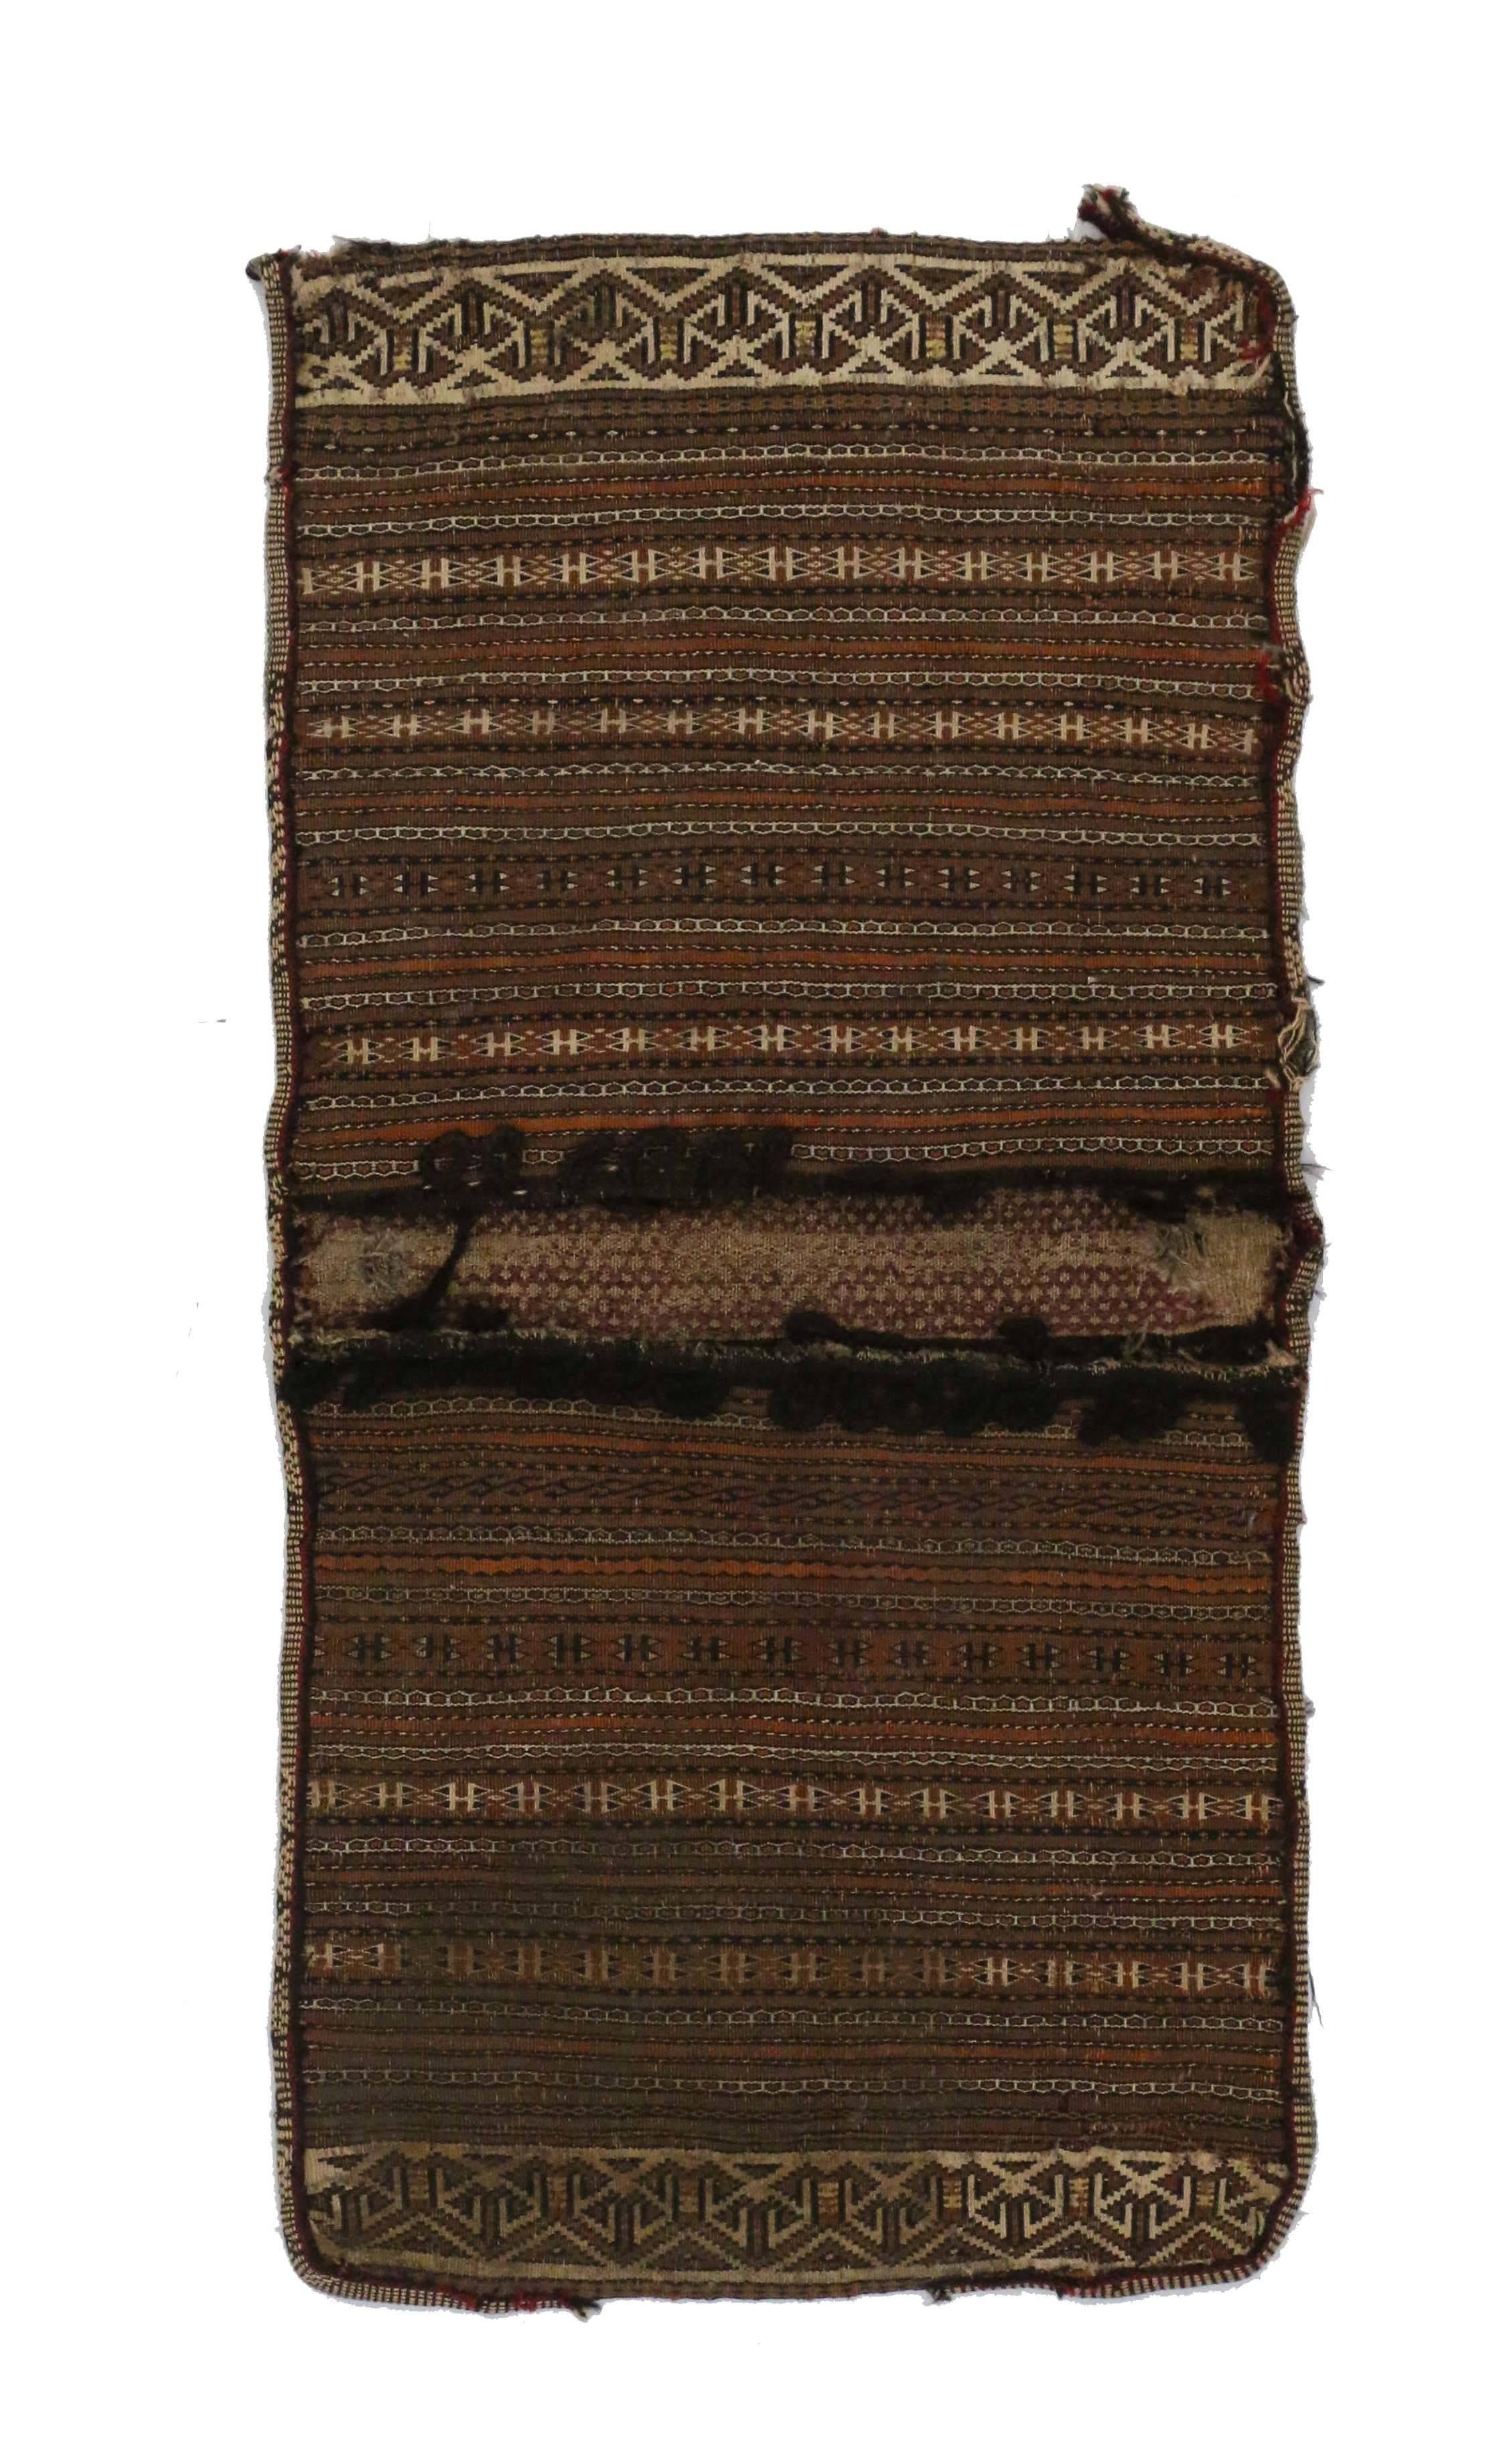 Antique Baluch Bagface, Saddlebag, Afghan Rug, Textile Art, Tribal Wall Hanging In Good Condition For Sale In Dallas, TX